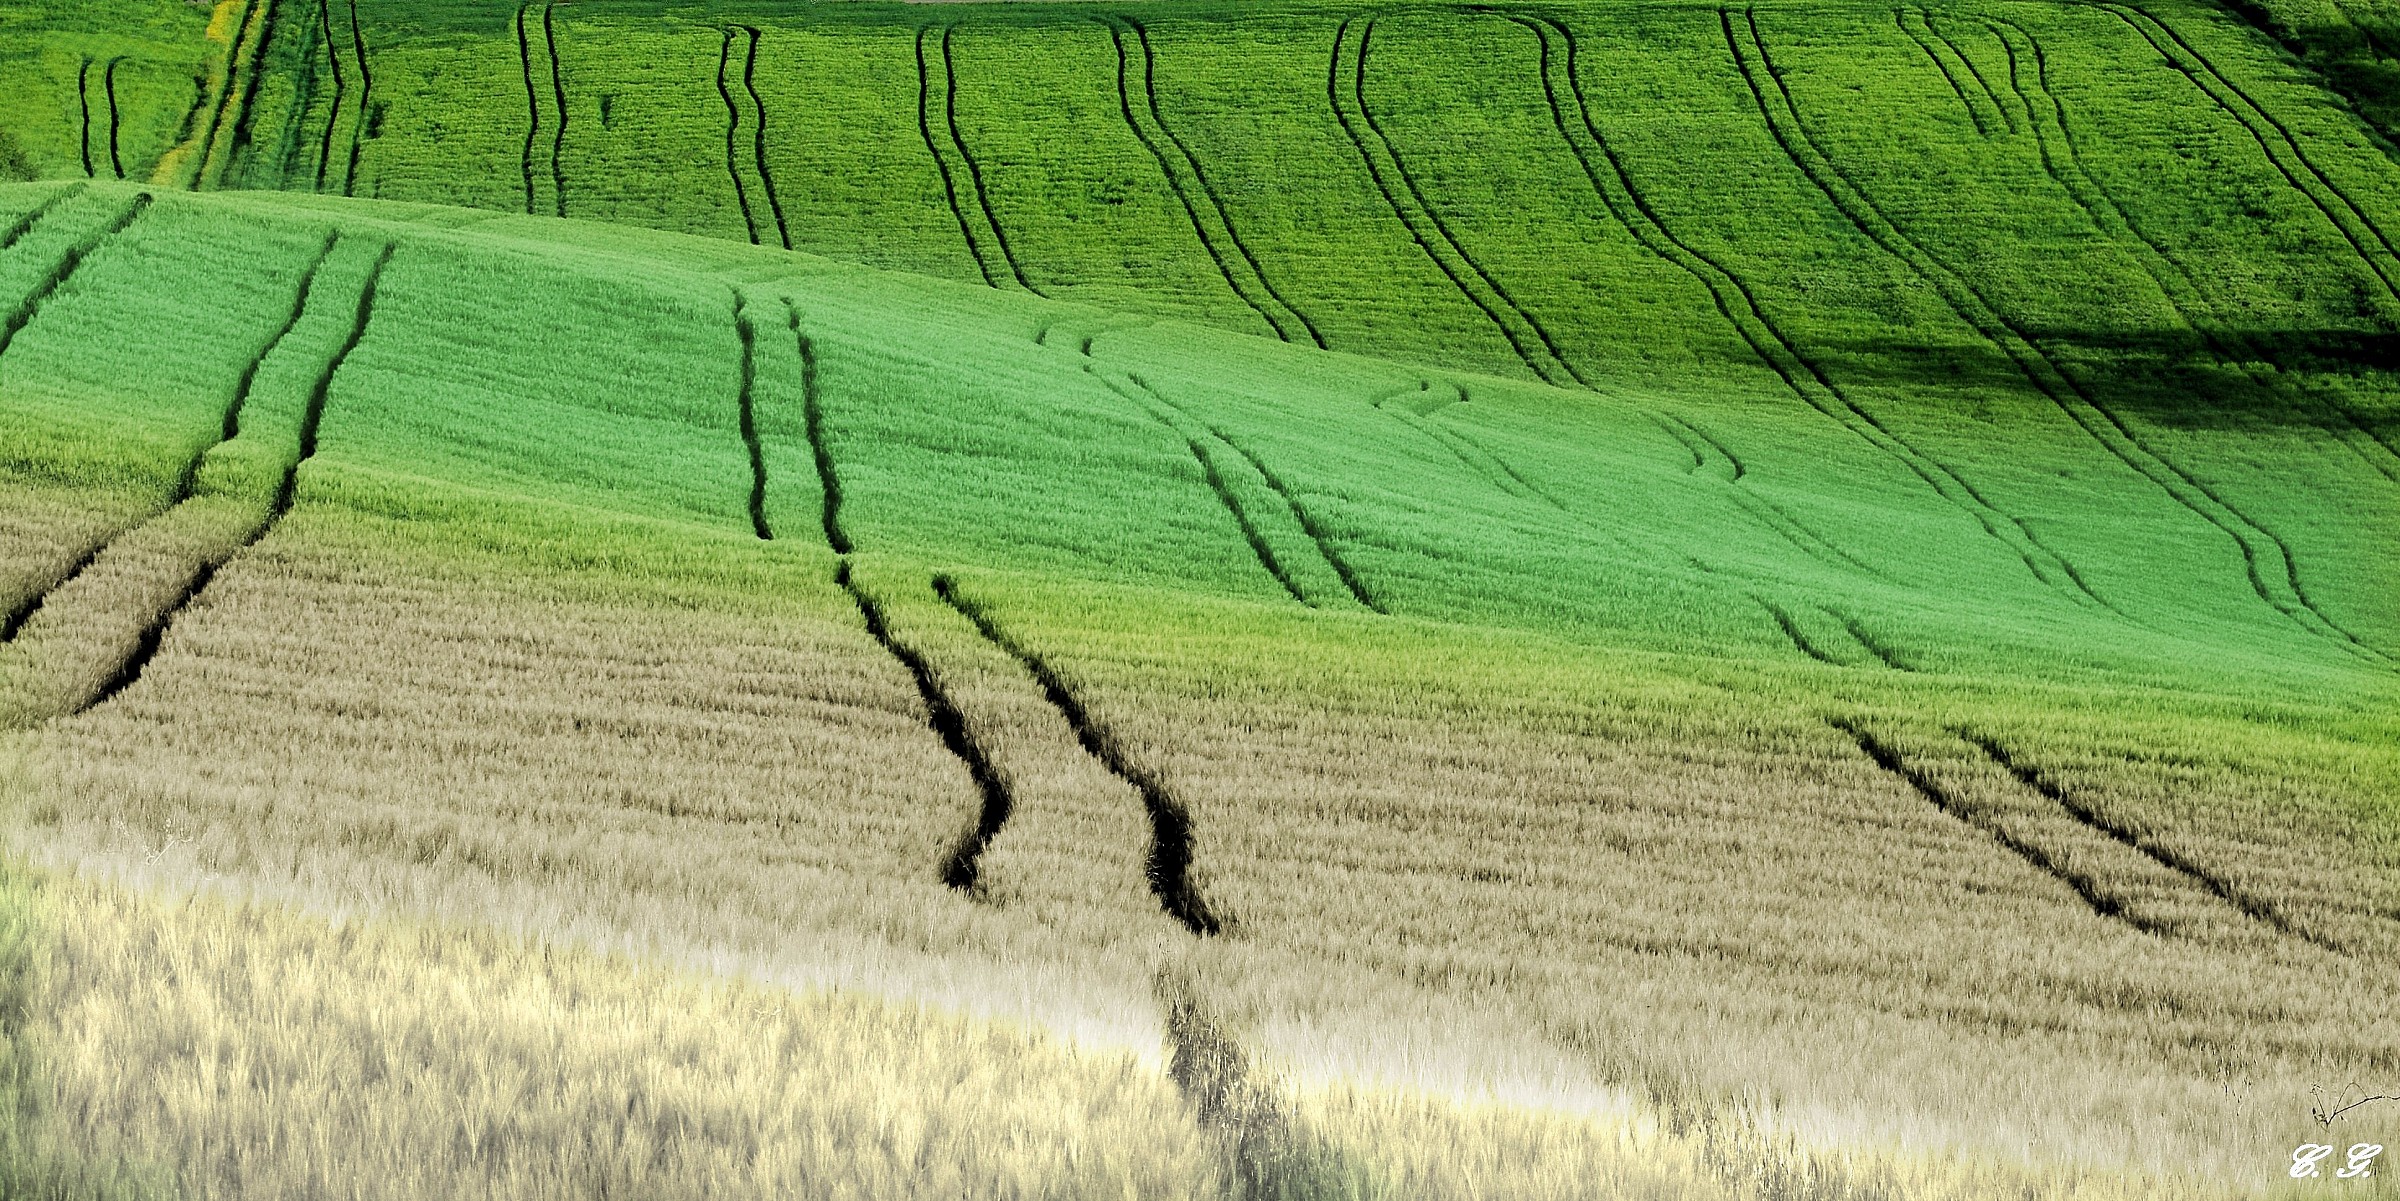 Furrows and colors of life...